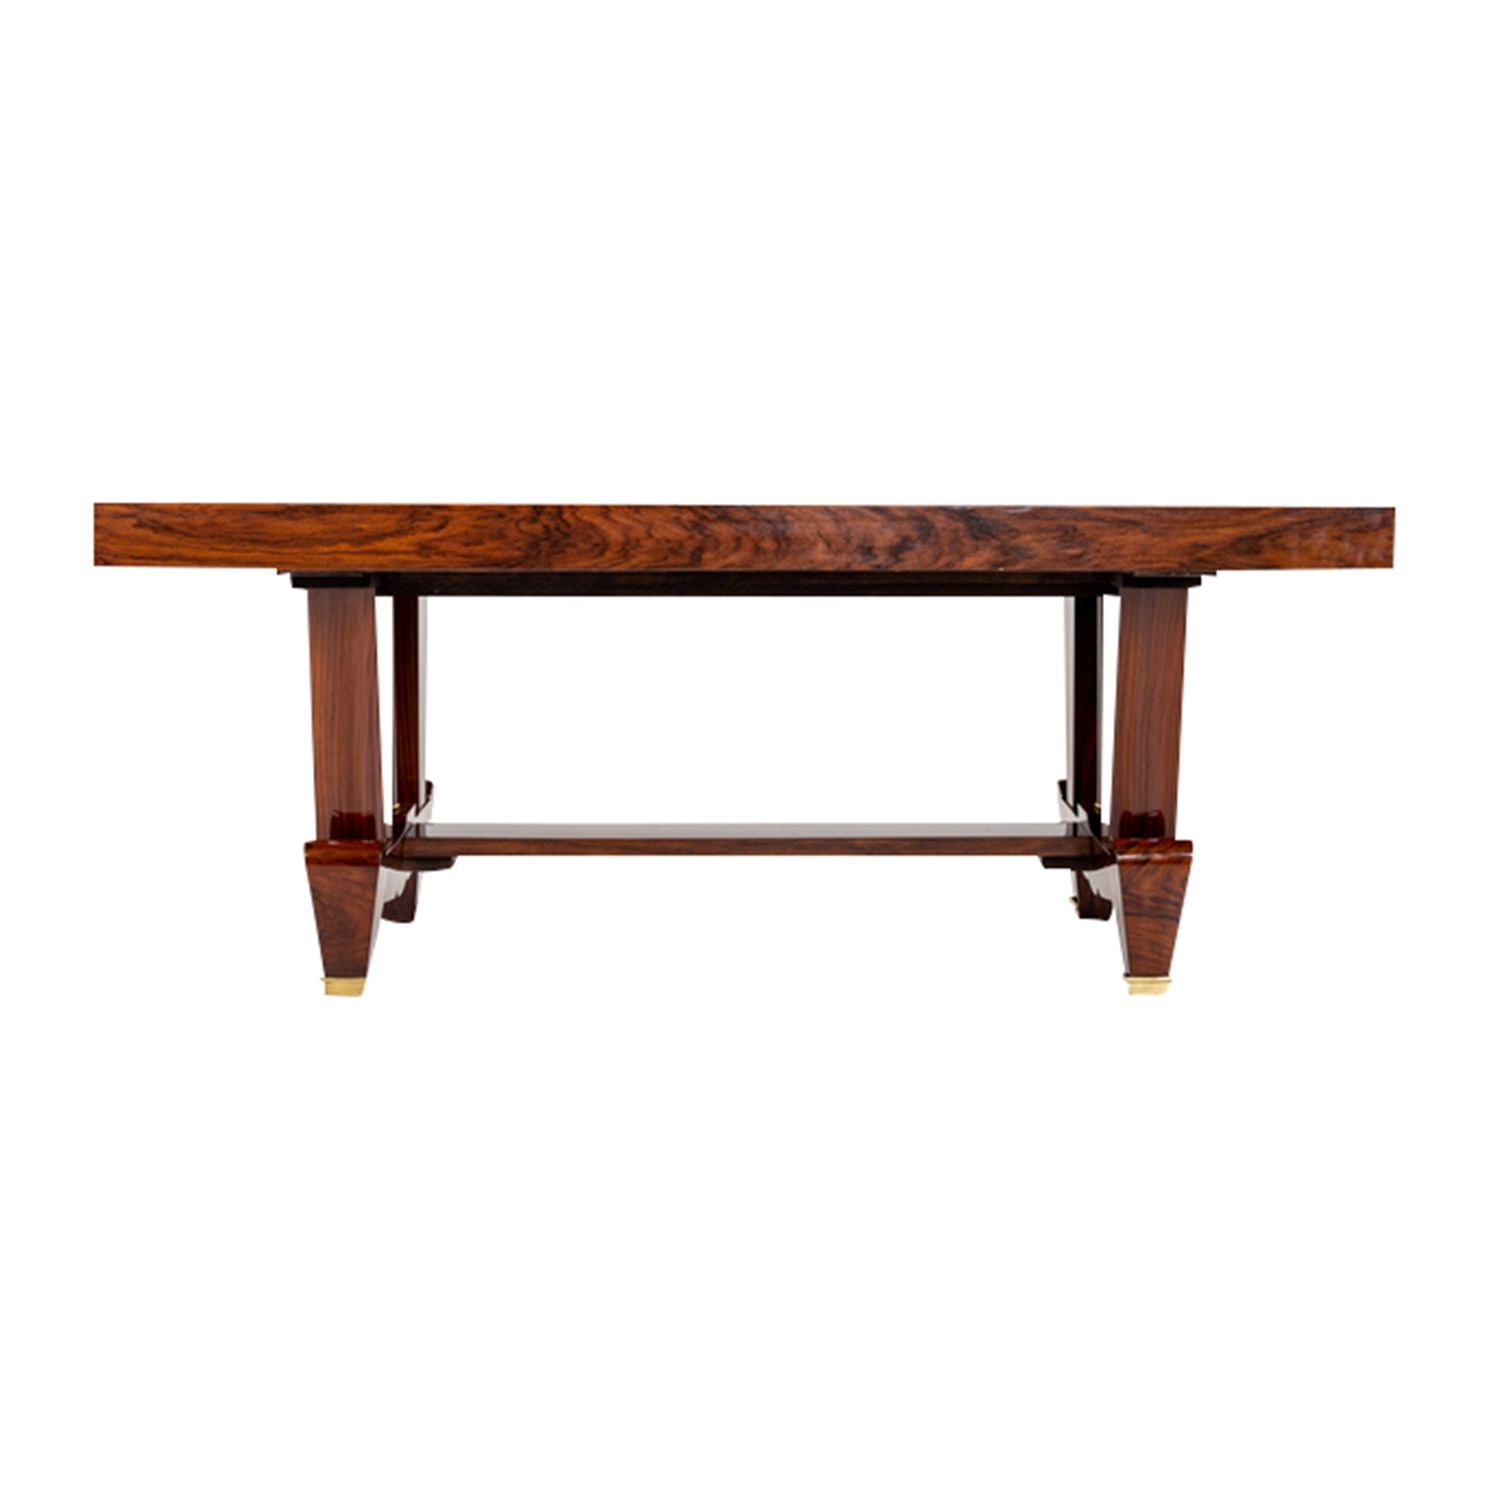 20th Century Brown French Art Deco Polished Mahogany Dining Table – Parisian Desk